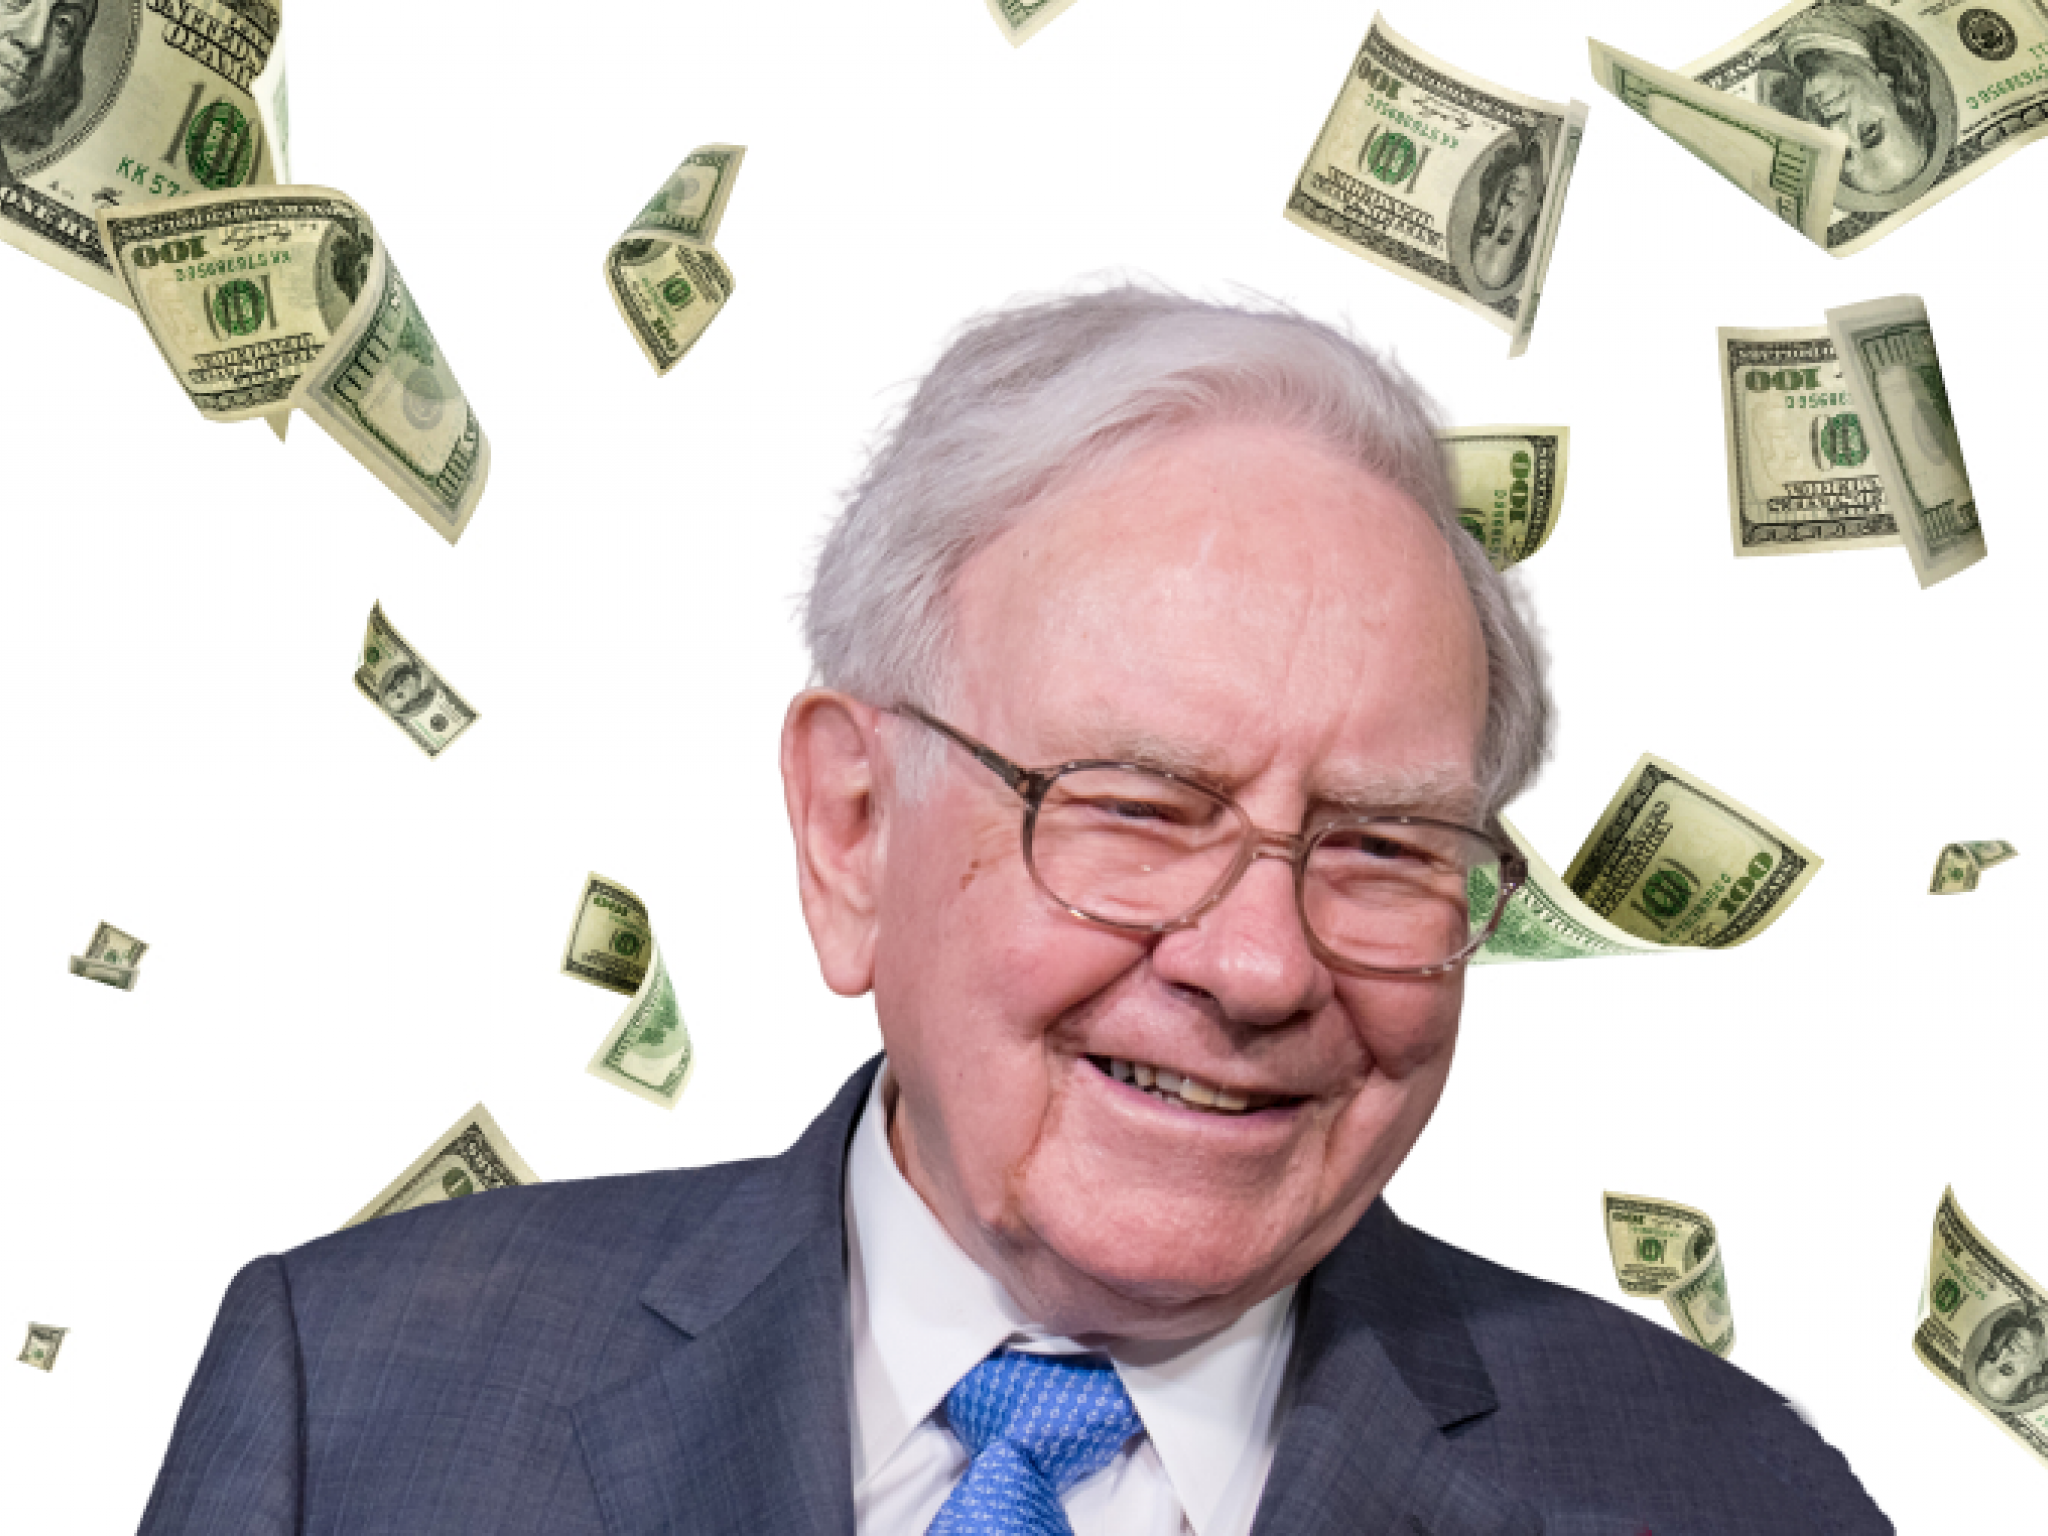  warren-buffetts-insurance-empire-doesnt-pay-dividends-but-these-5-insurance-companies-do 